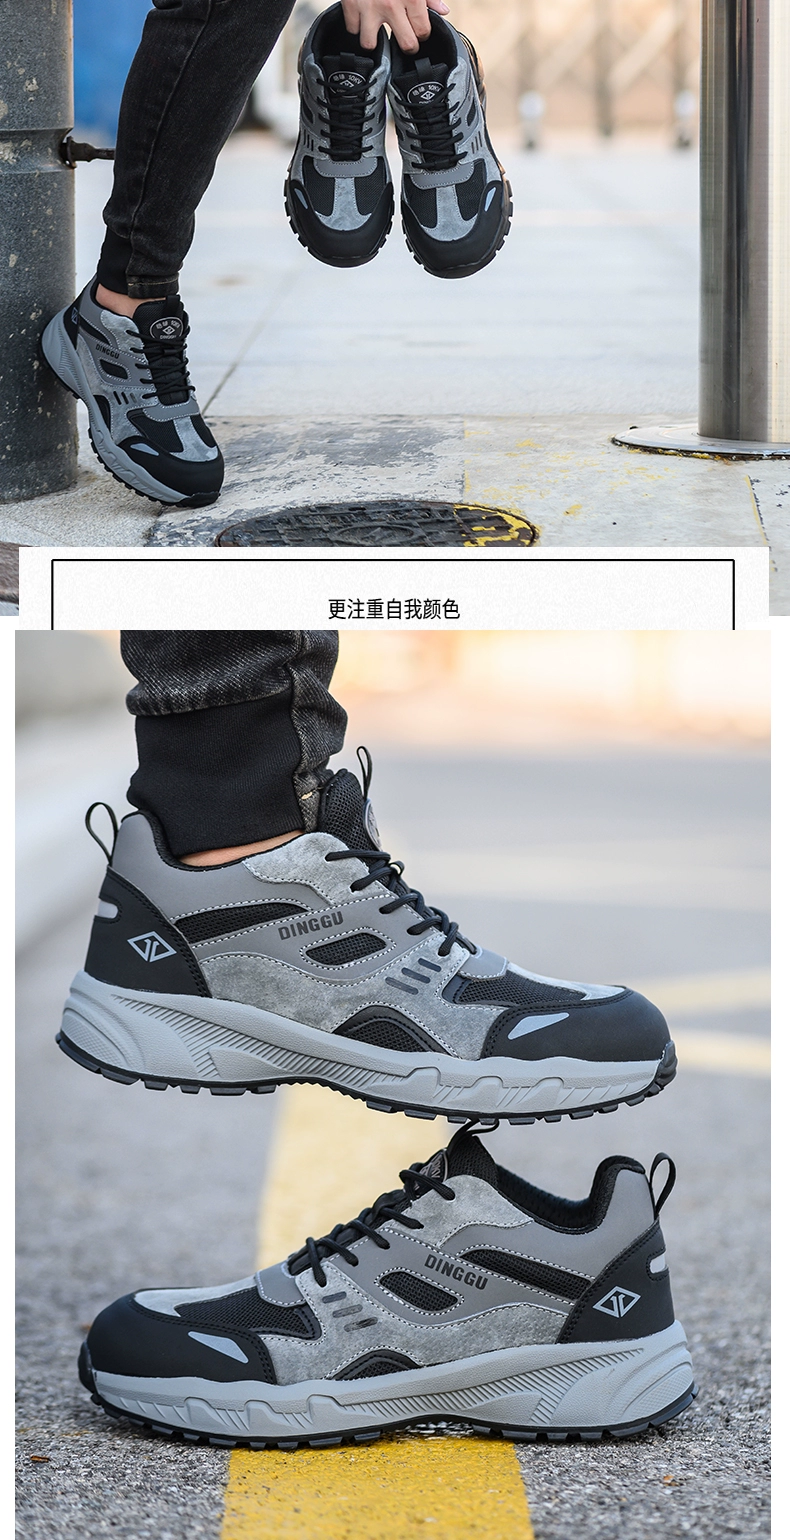 Labor protection shoes for men, anti-smash and anti-puncture steel toe, winter electrician insulation 6kv10kv old protection with steel plate work